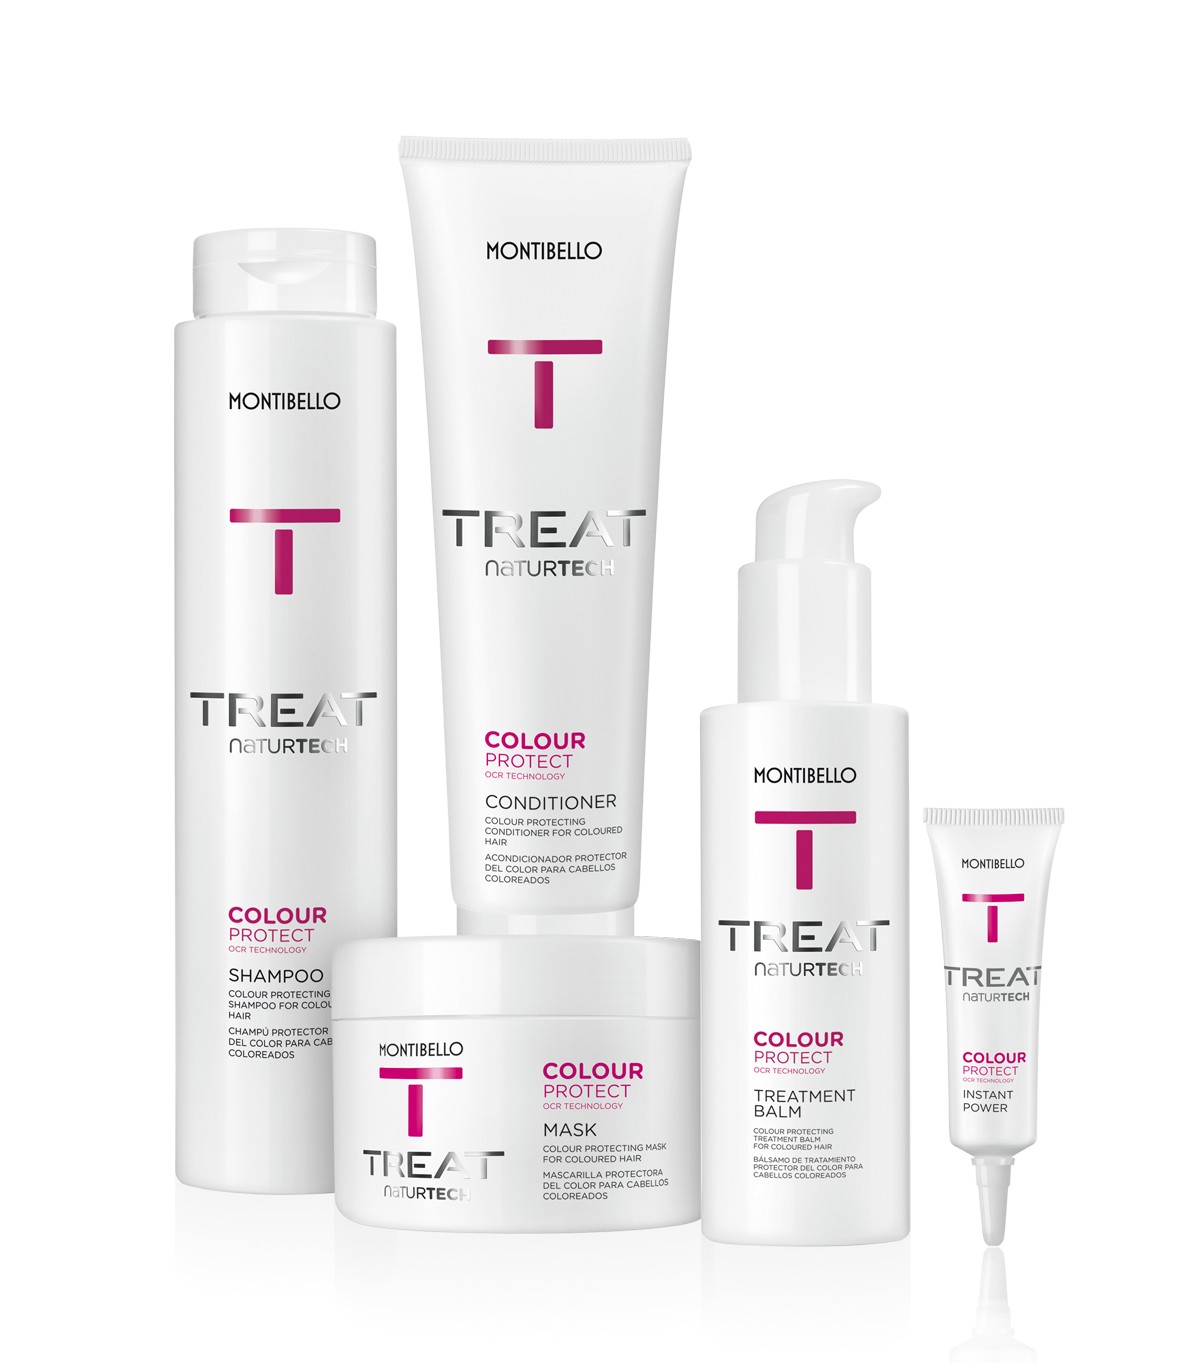 TREAT-NT-COLOUR-PROTECT-product-group-packshot